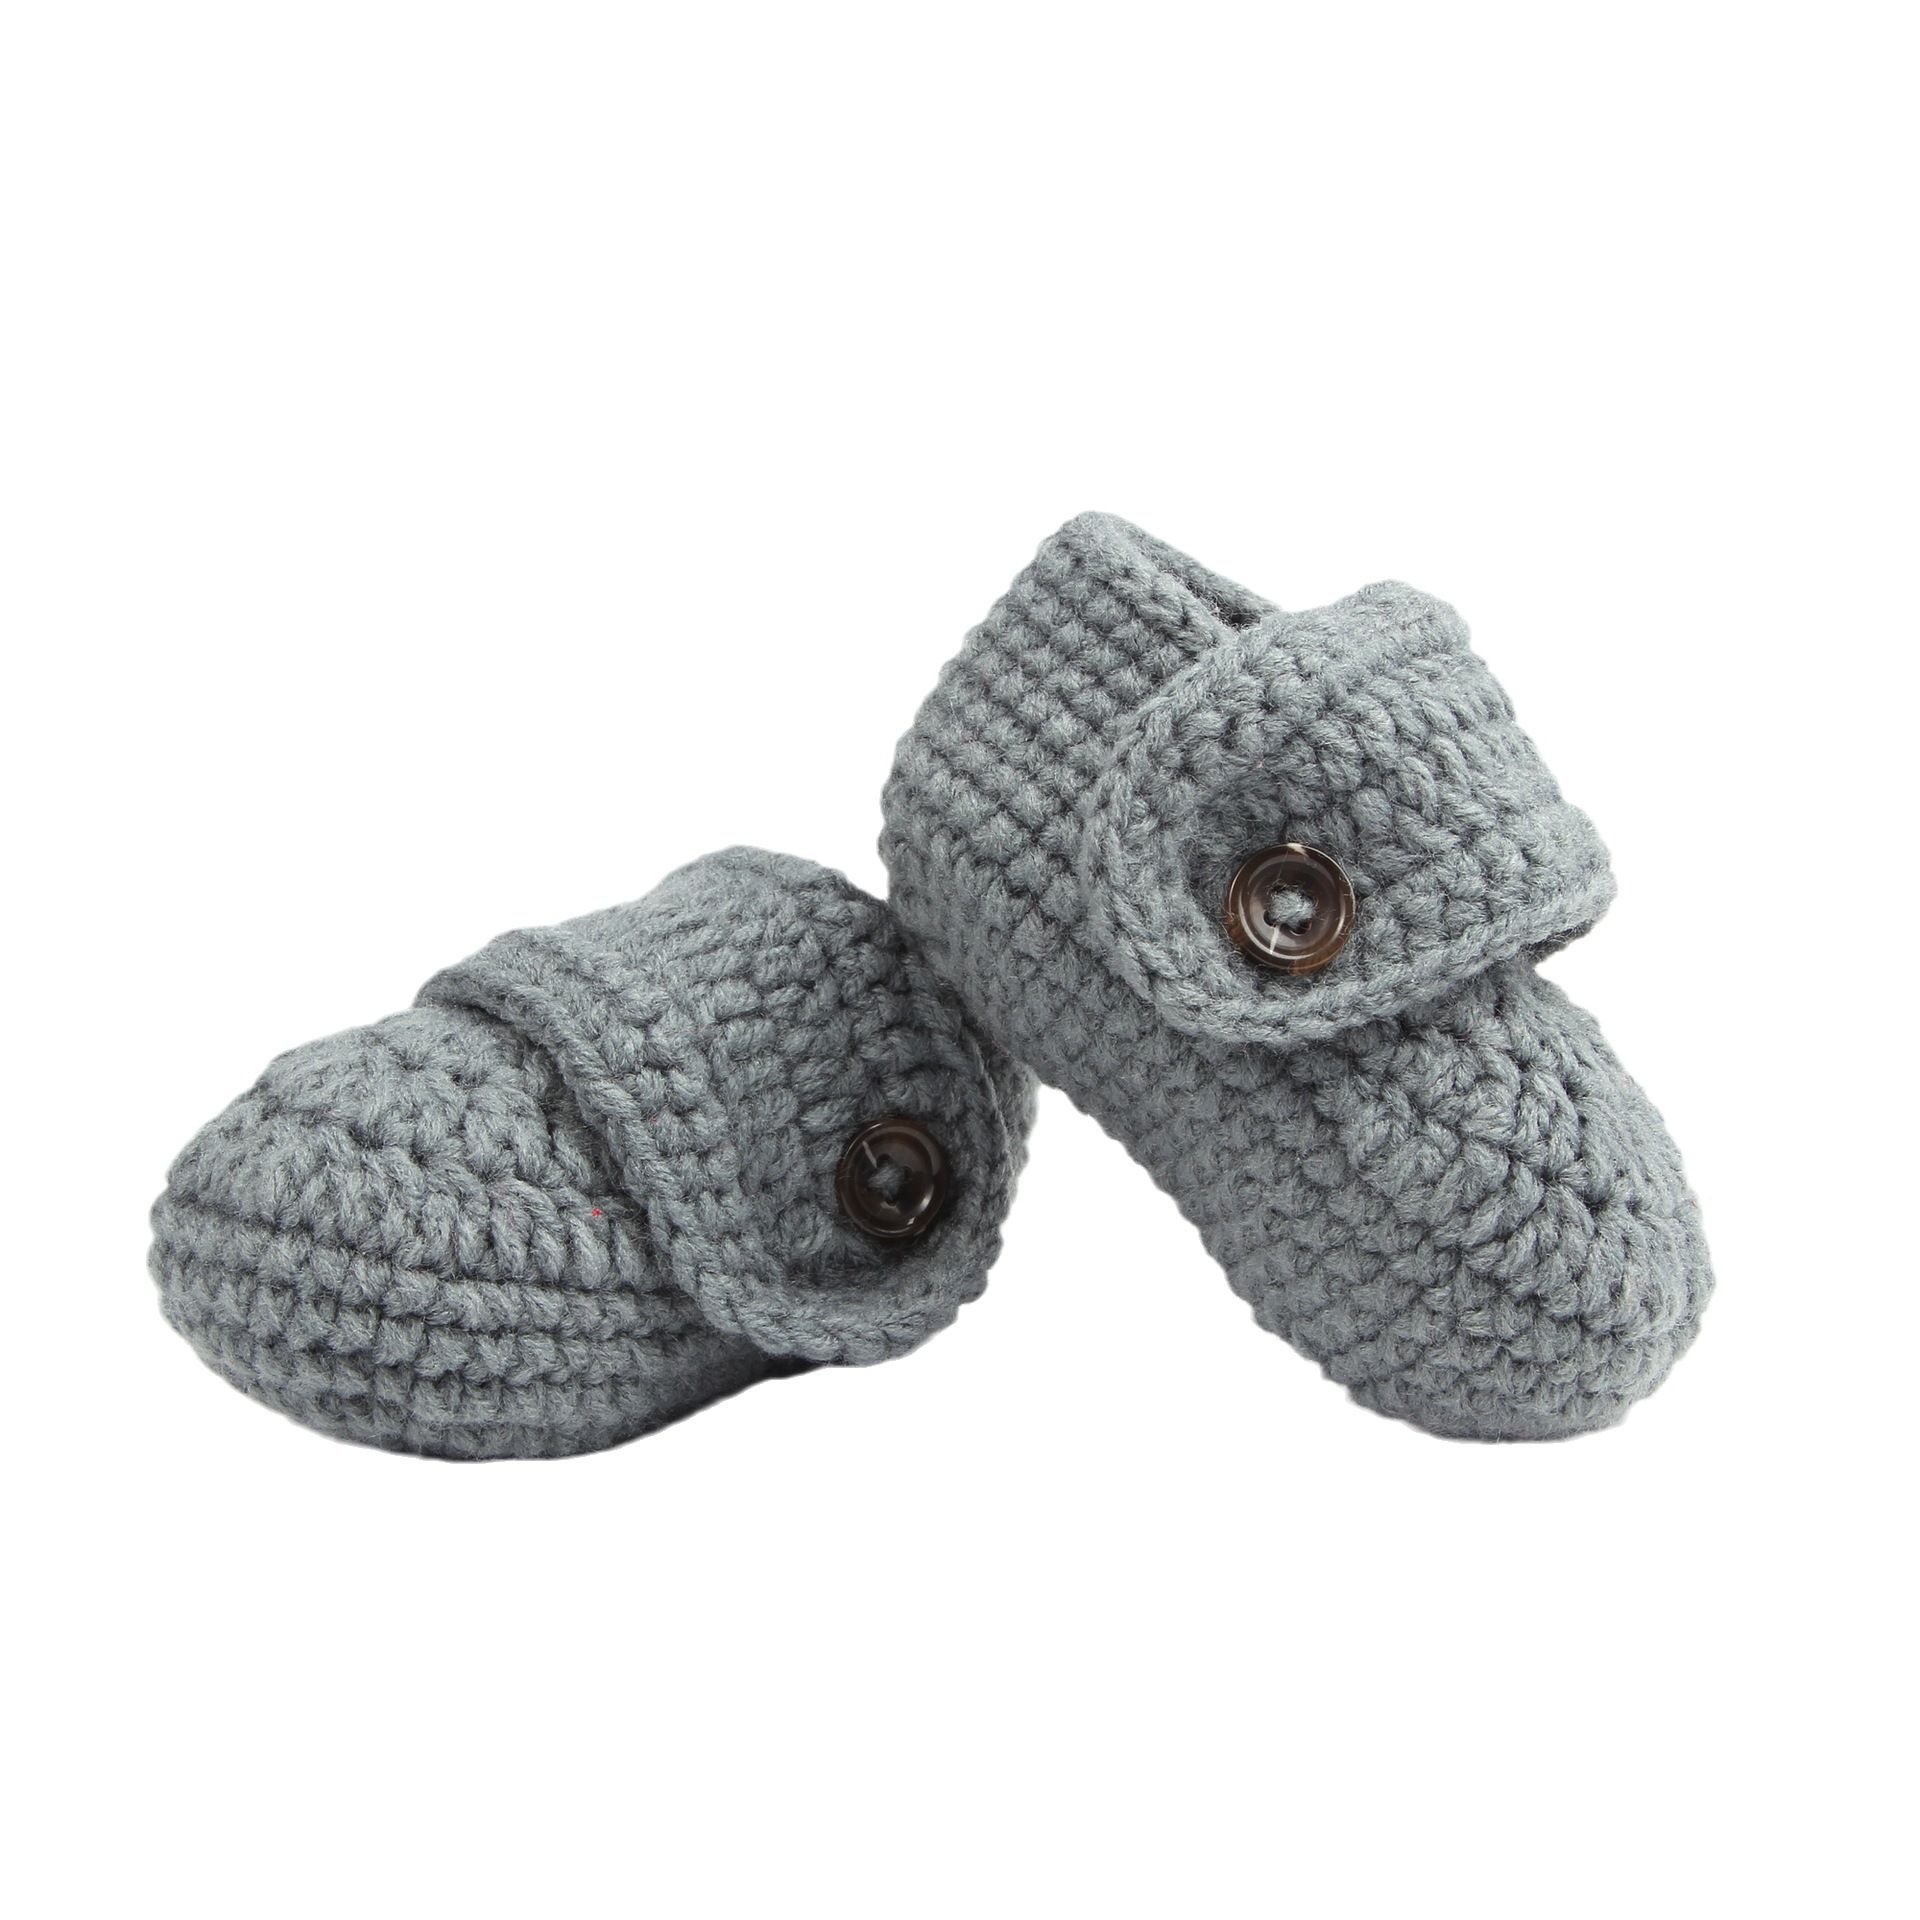 Baby's Hand knitted wool socks